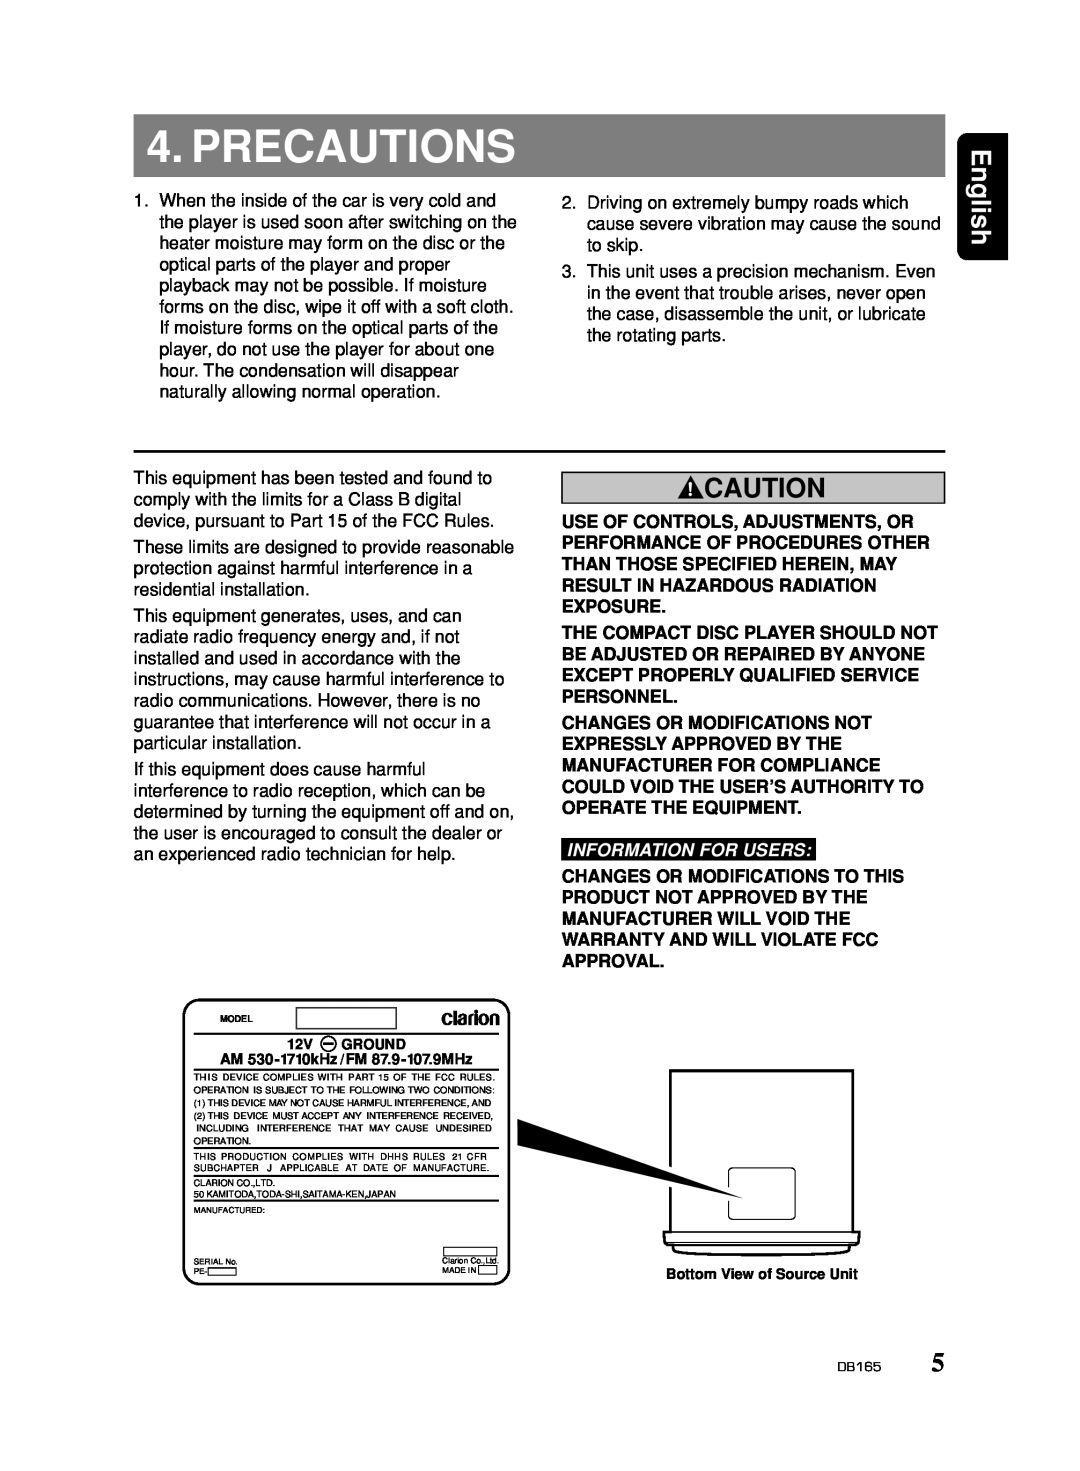 Clarion DB165 owner manual Precautions, English, Information For Users 